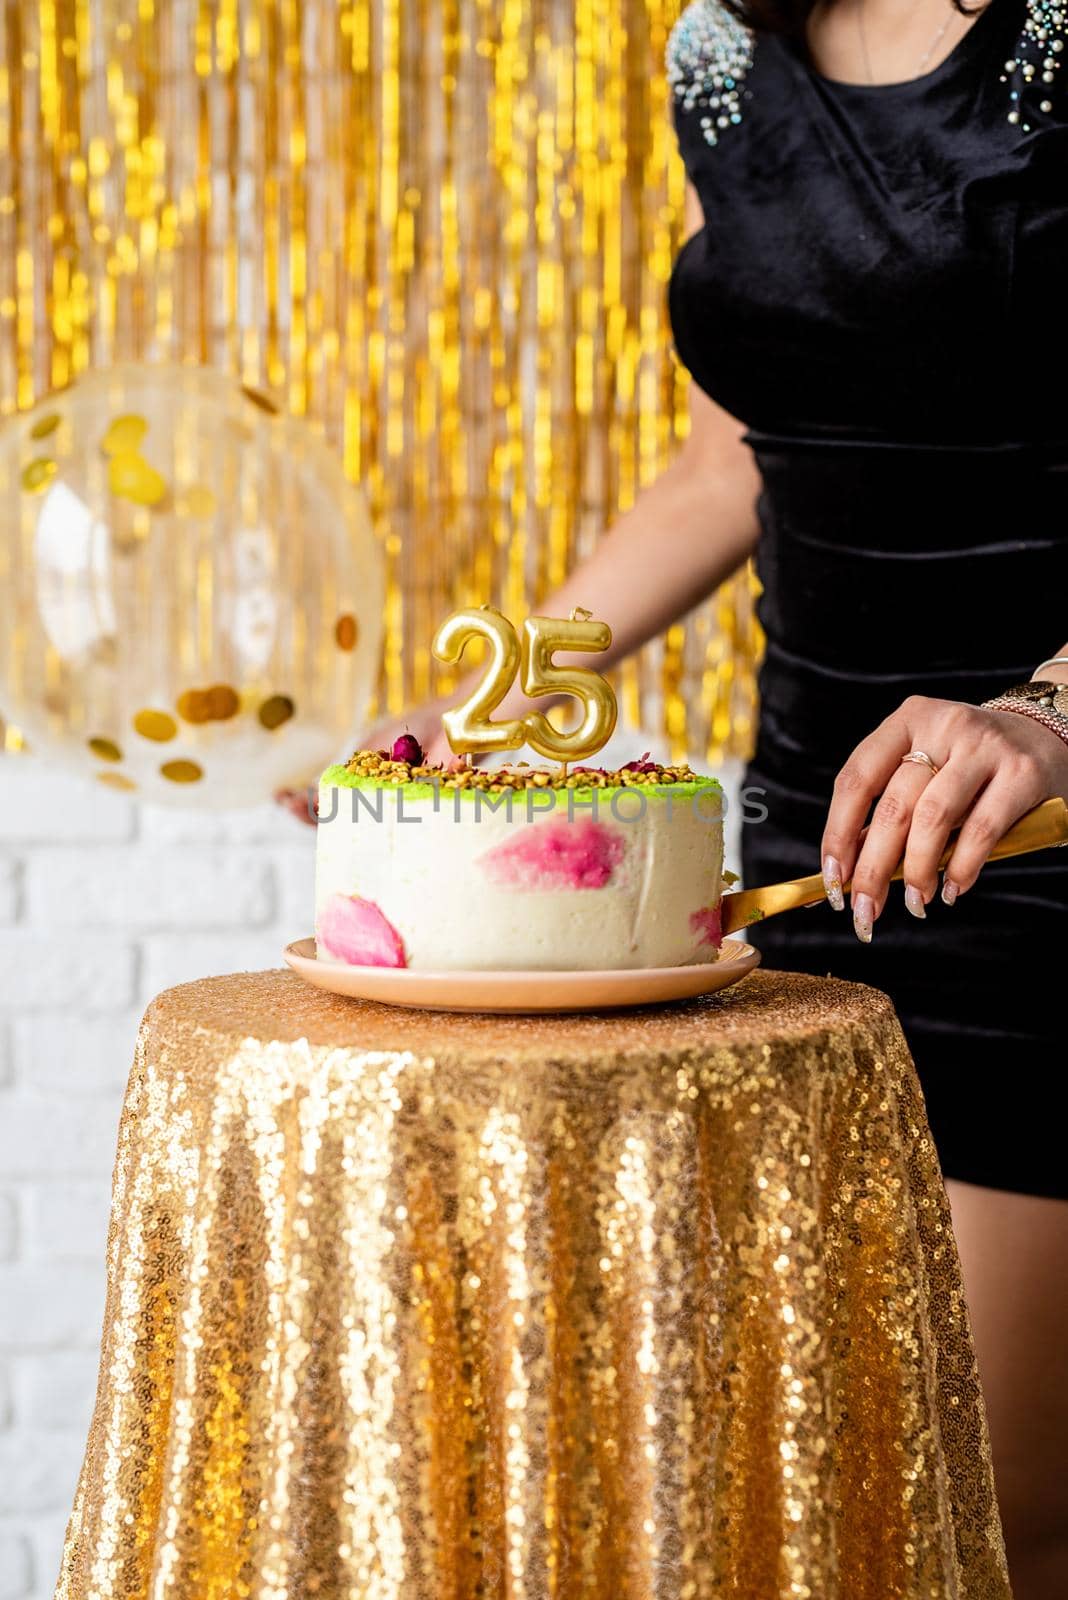 Birthday party. Beautiful brunette woman in black party dress holding ballooncelebrating her birthday cutting the cake